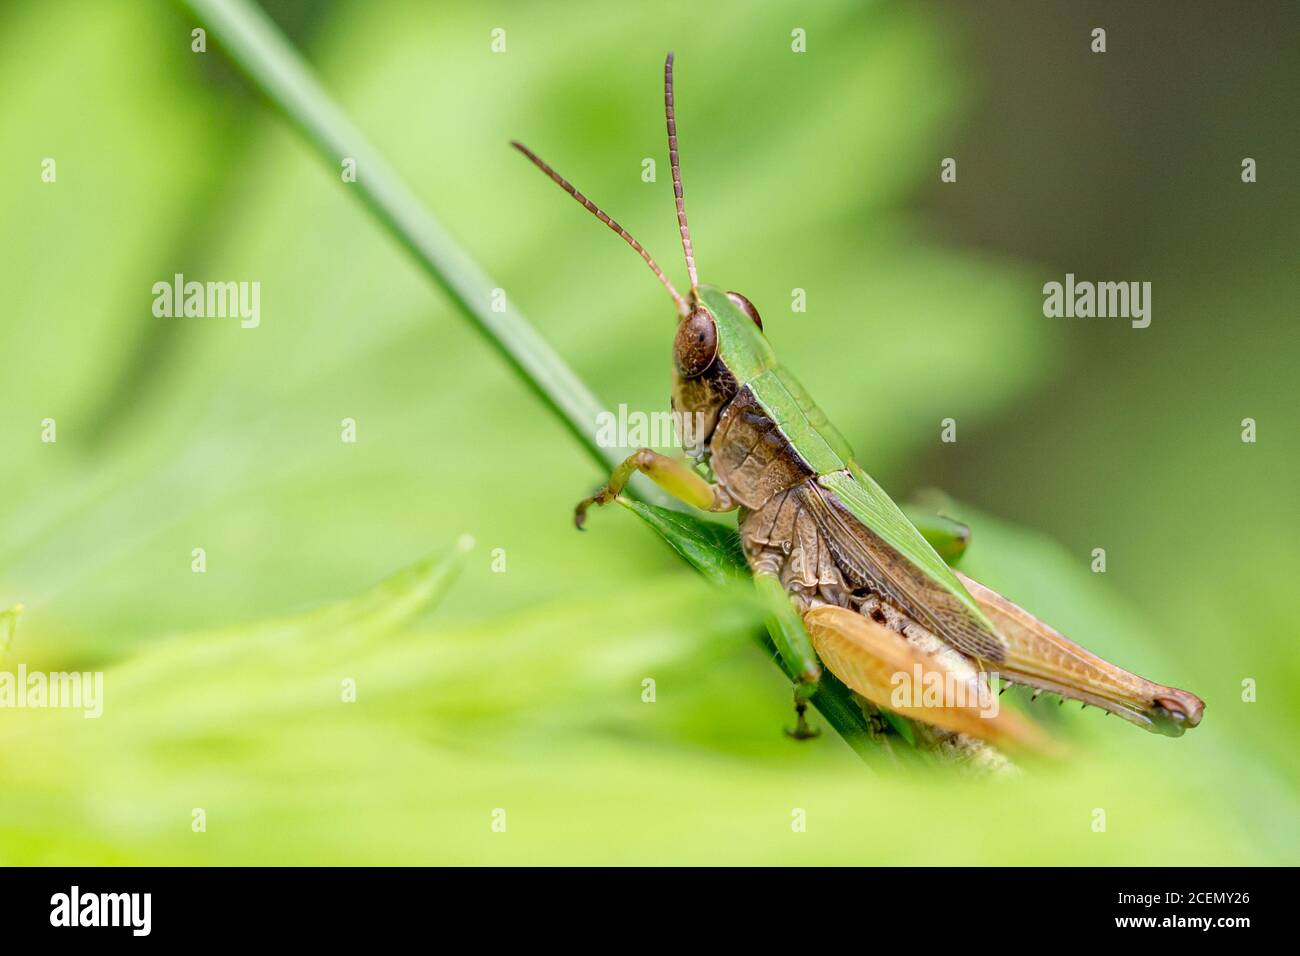 A green and brown grasshopper with large eyes and long antennae grasps the stem of a plant as it contemplates jumping away. Stock Photo